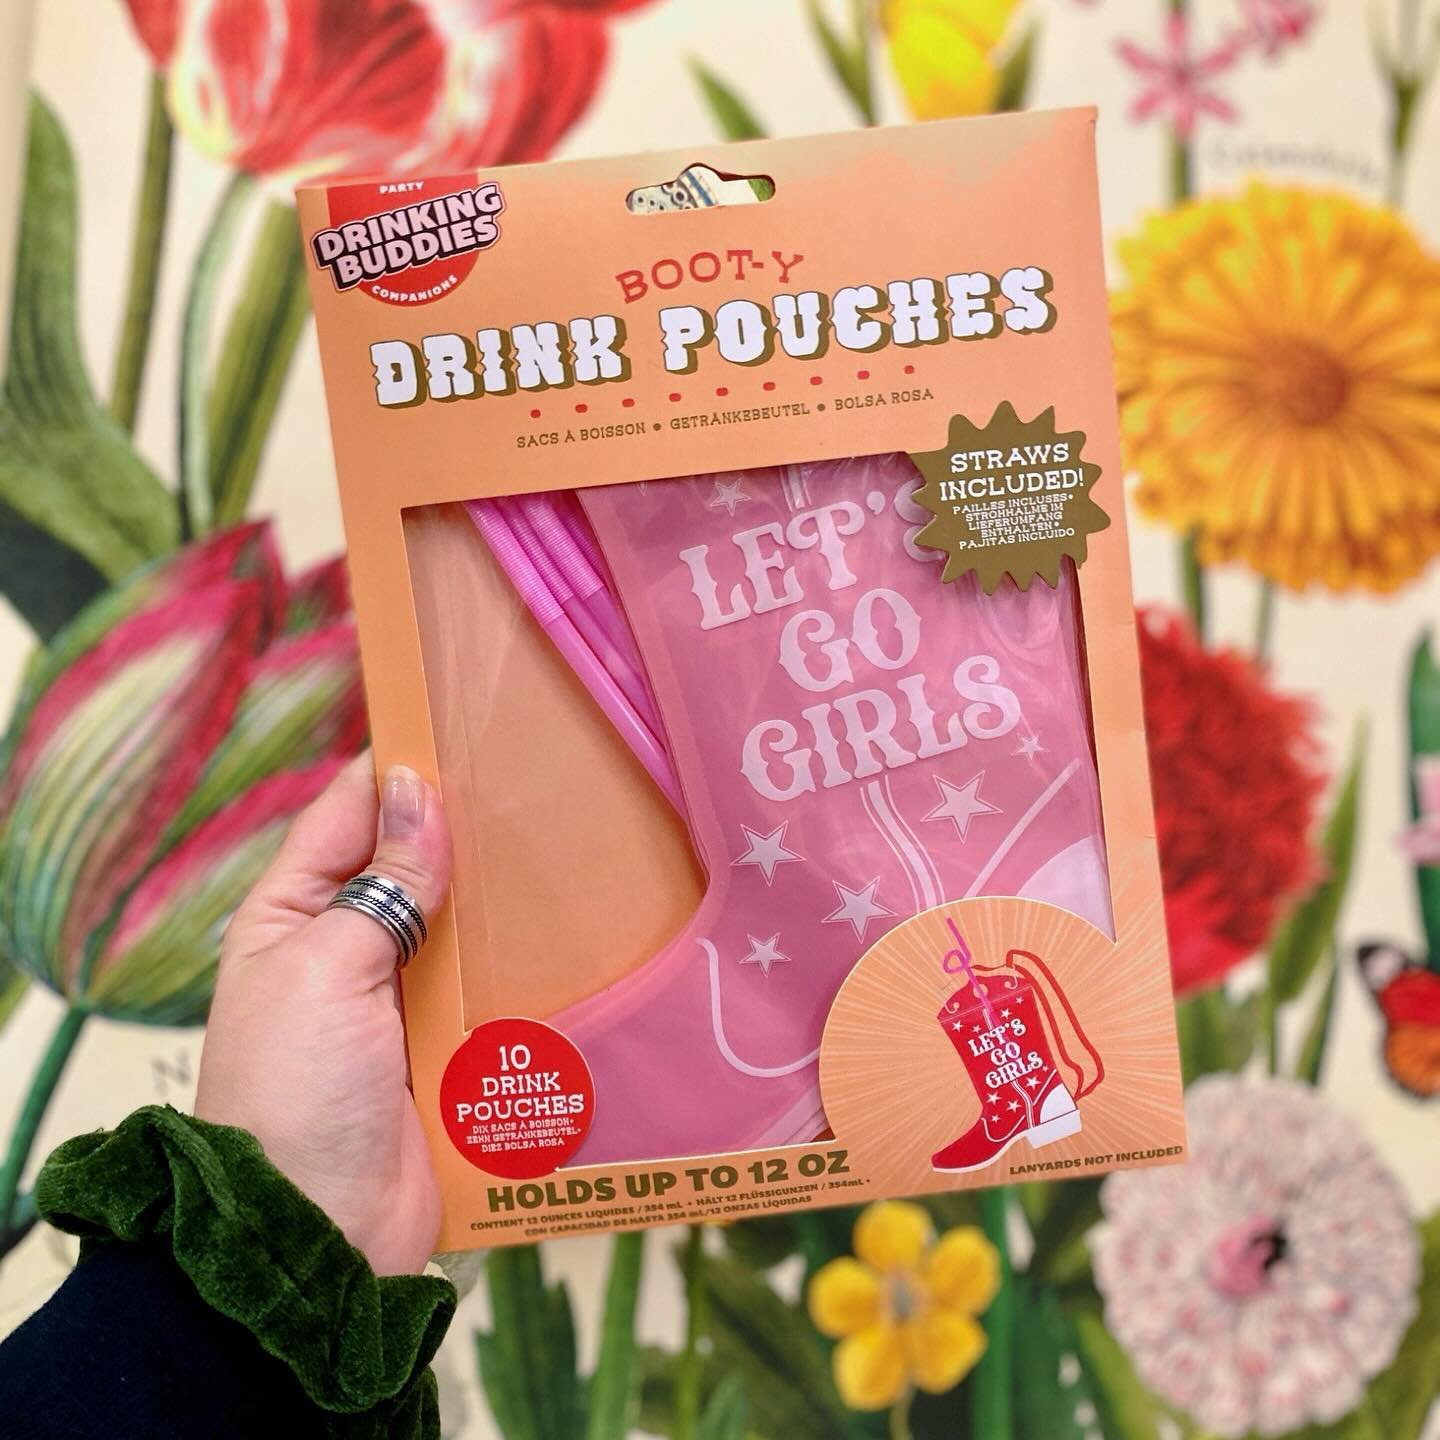 The weather today is sooo stunning it literally feels like pool weather?? Poolside drinks with the girlies, anyone? 😘🍹 We&rsquo;re so obsessed with these drink pouches we got in&mdash;it&rsquo;s like adult Capri Sun, but also aesthetically pleasing